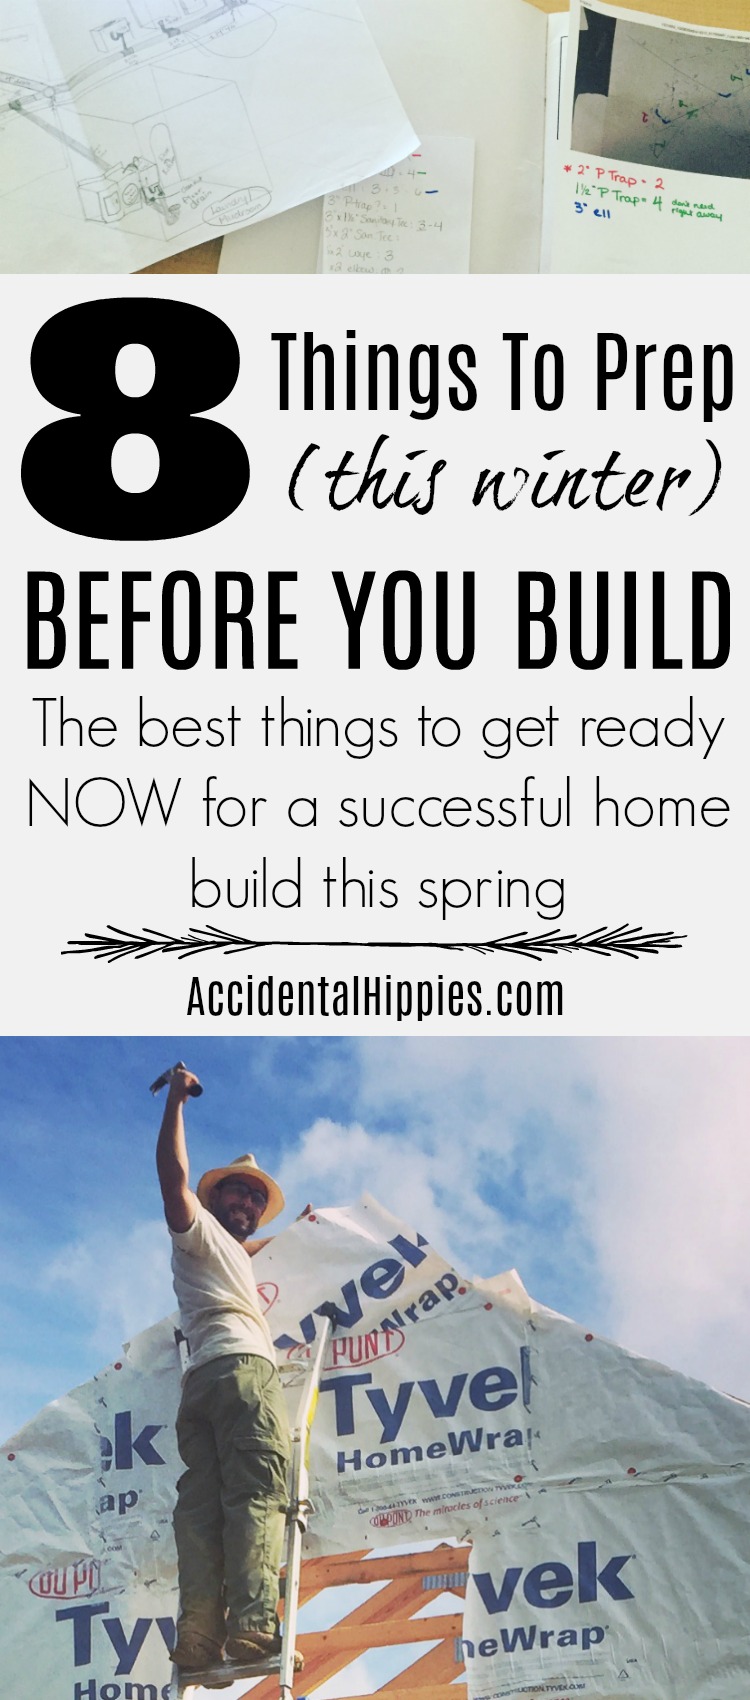 If you plan to build your own home by hand there are 8 things you need to prep NOW in the winter before building this spring